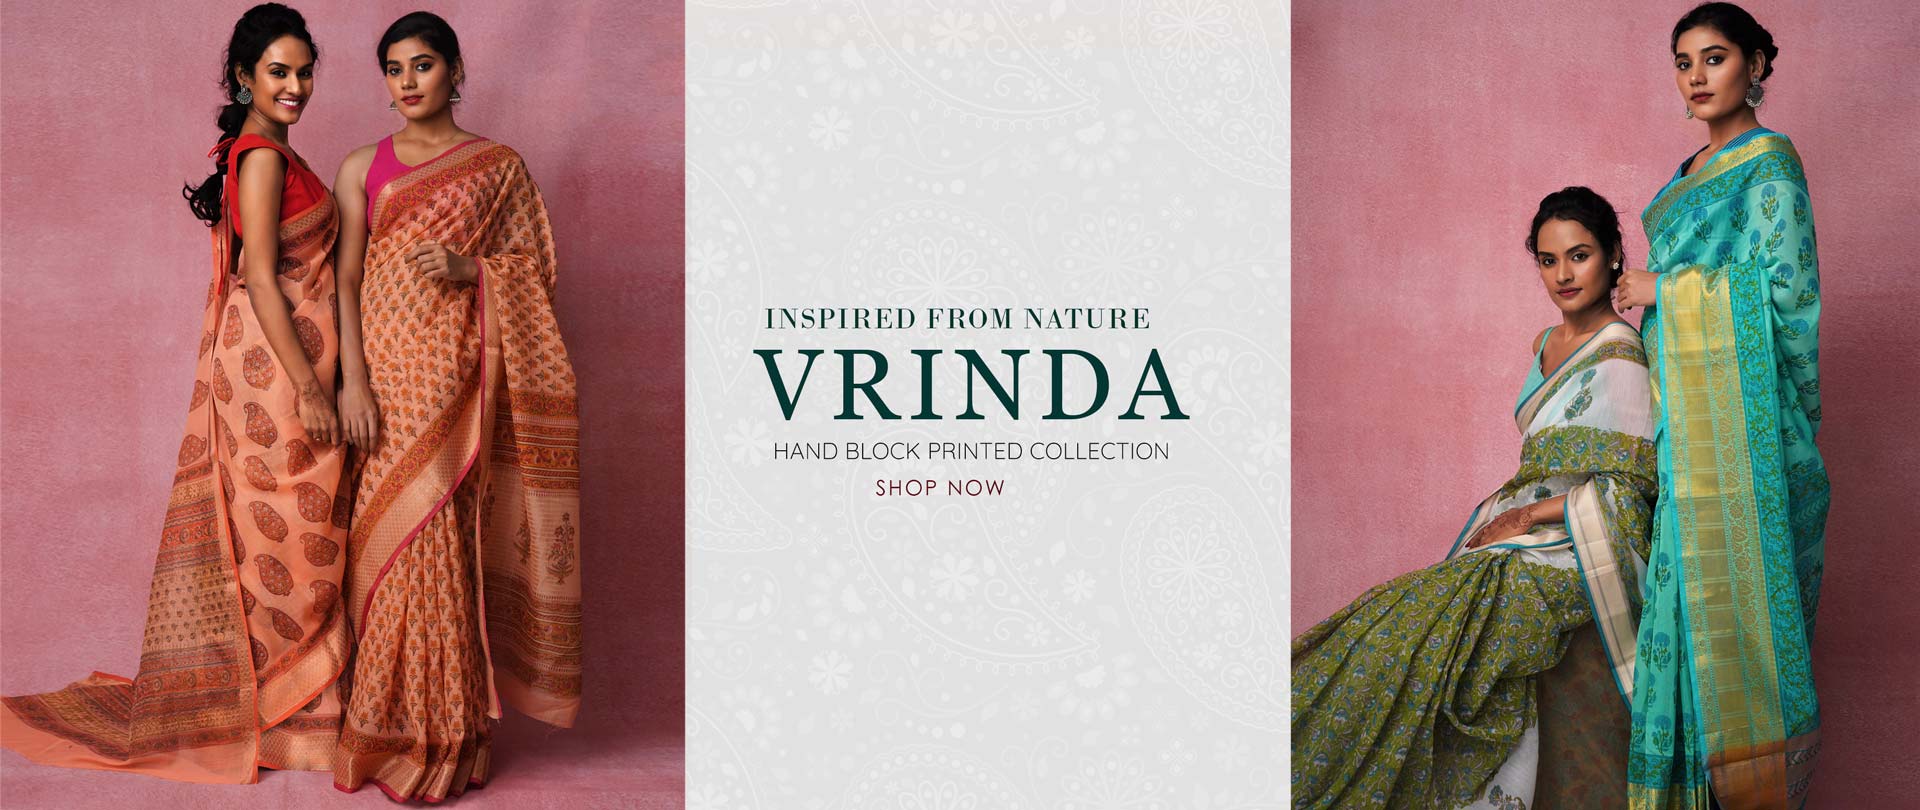 Vrinda – an extension of the theme on Purity, begun by Pavni